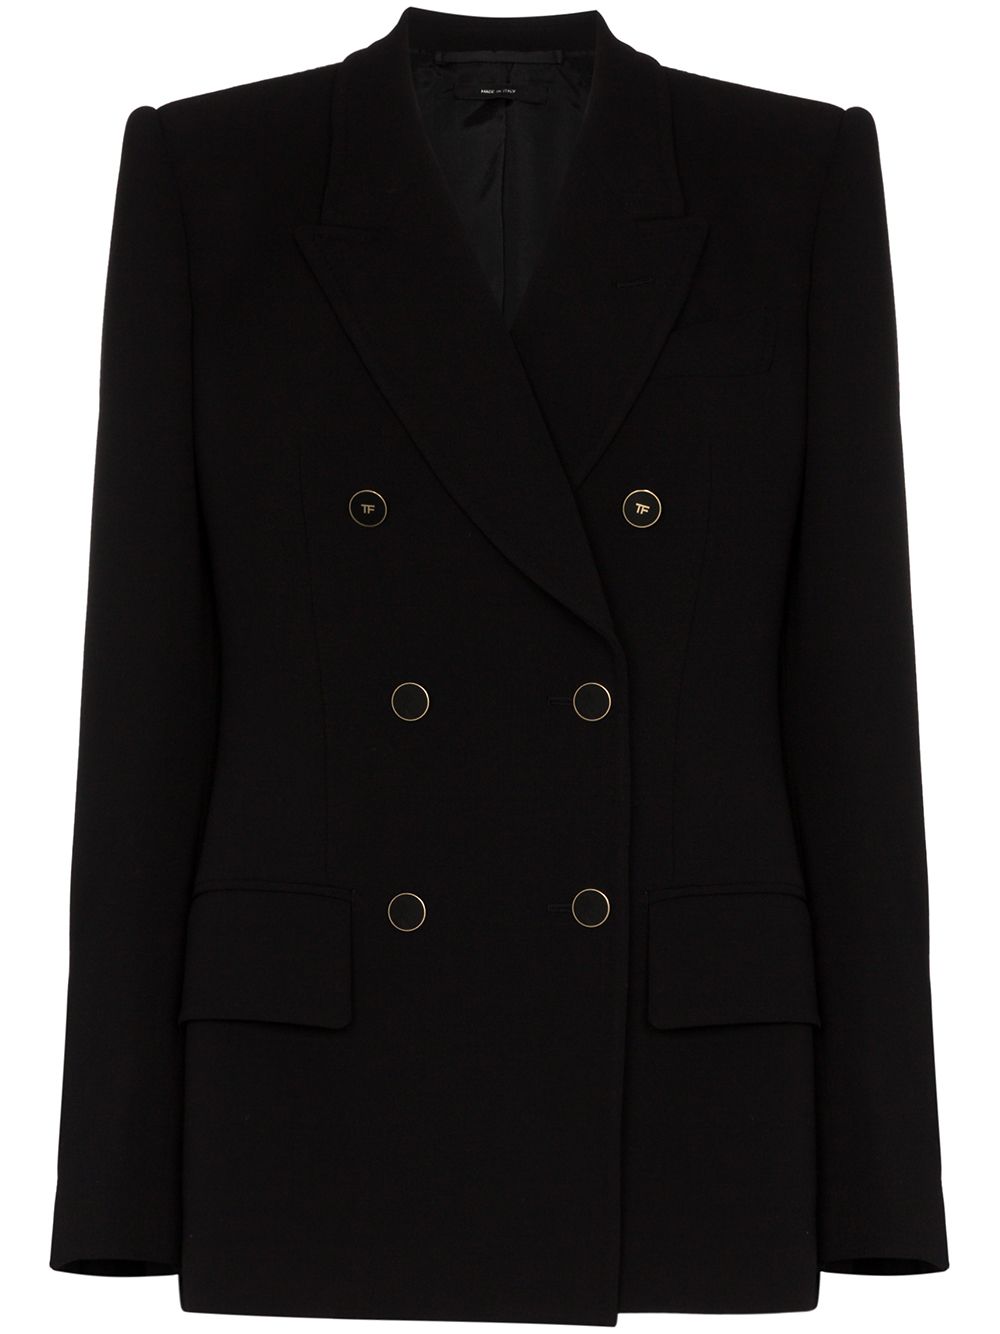 TOM FORD DOUBLE-BREASTED BLAZER